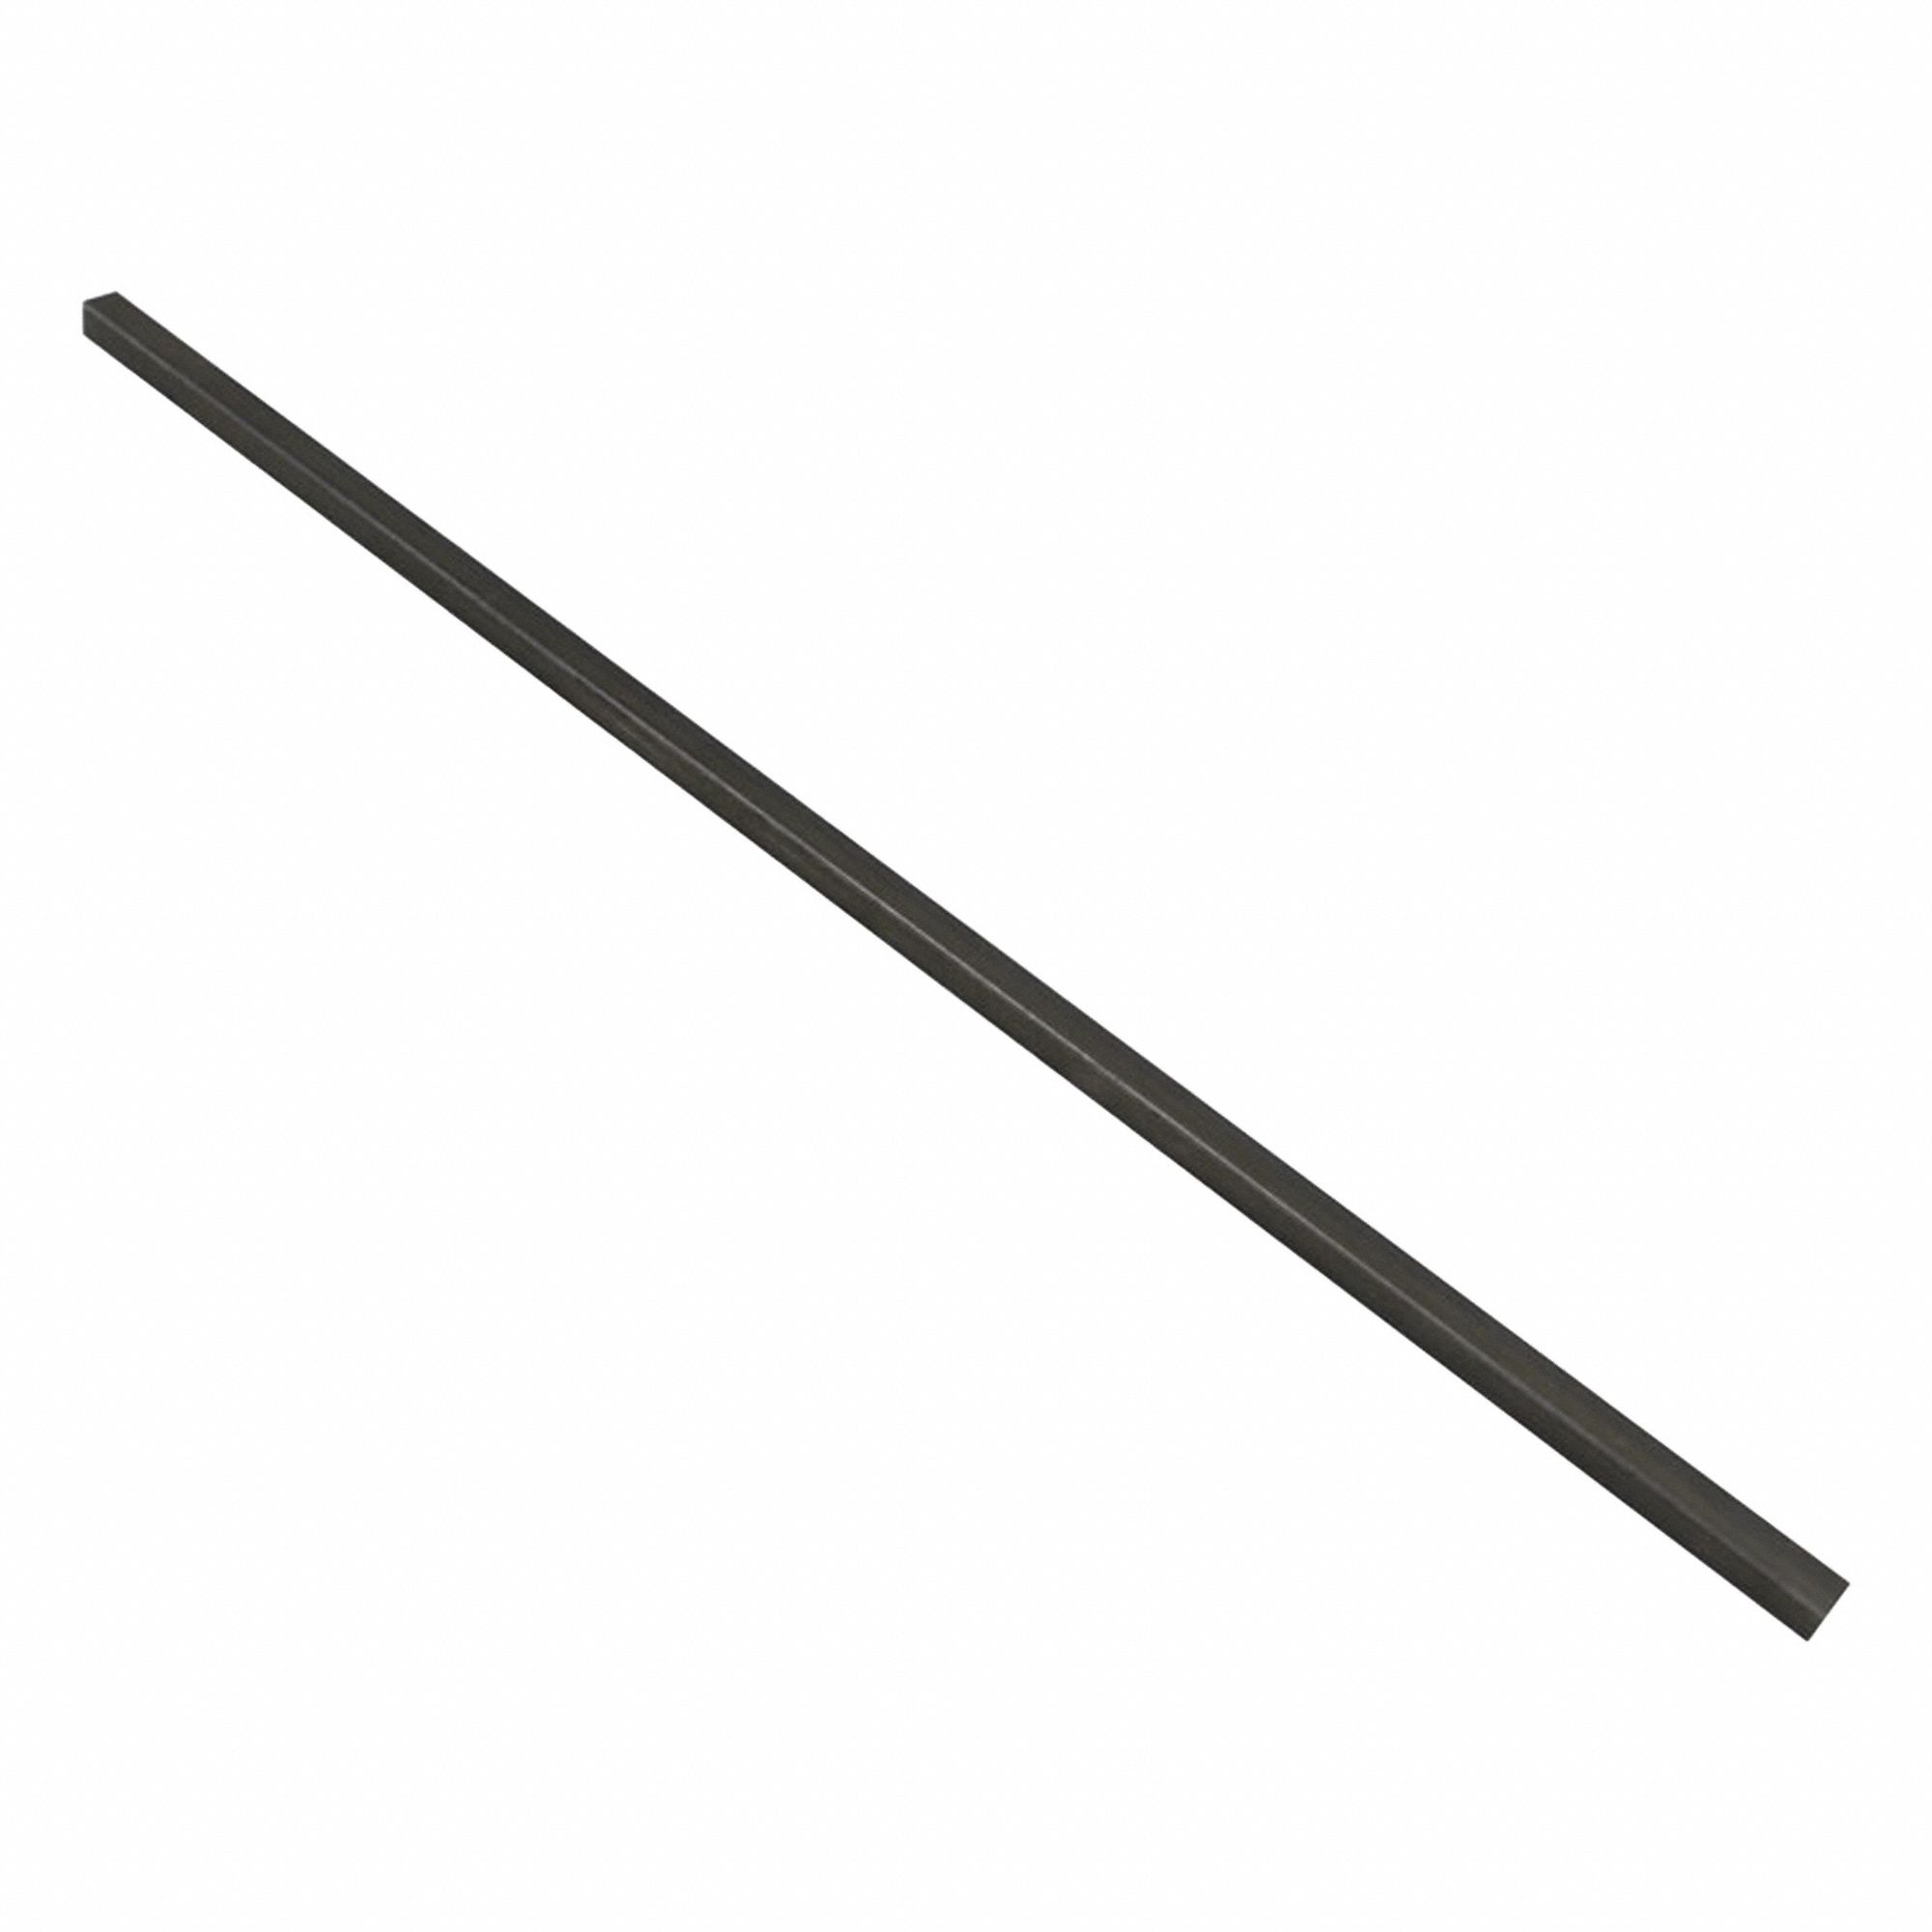 KEY STOCK, SQUARE, OVERSIZE, 12 X 1/4 X 1/4 IN, 15/16 IN SHAFT DIA, PLAIN FINISH, CARBON STEEL